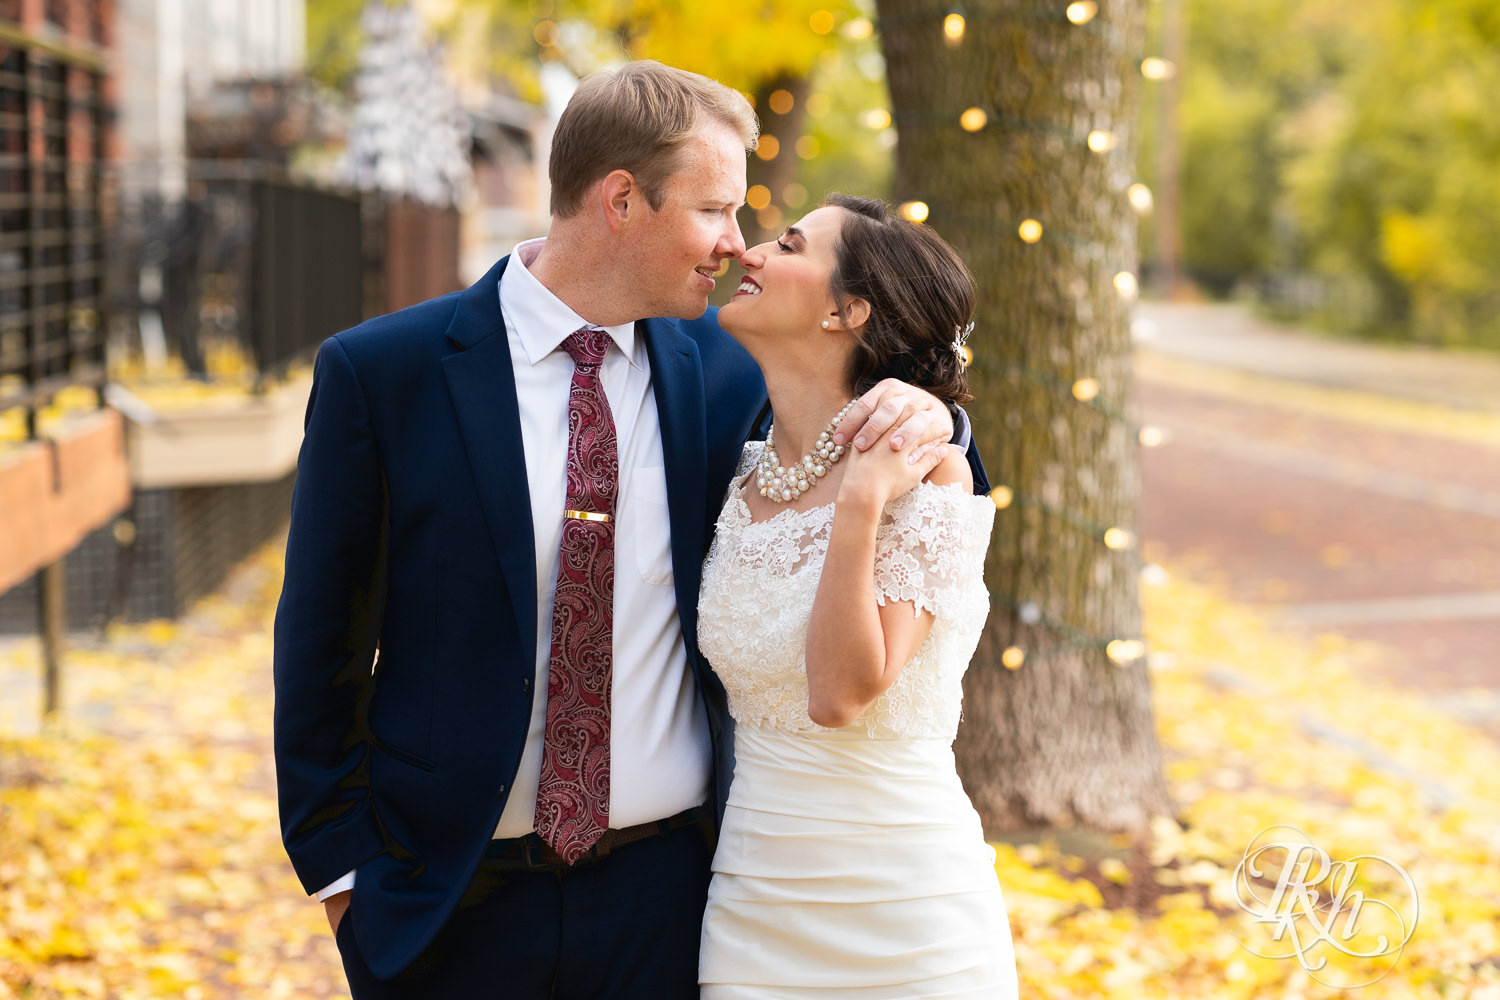 Bride and groom smile in fall leaves in Saint Anthony Main in Minneapolis, Minnesota.